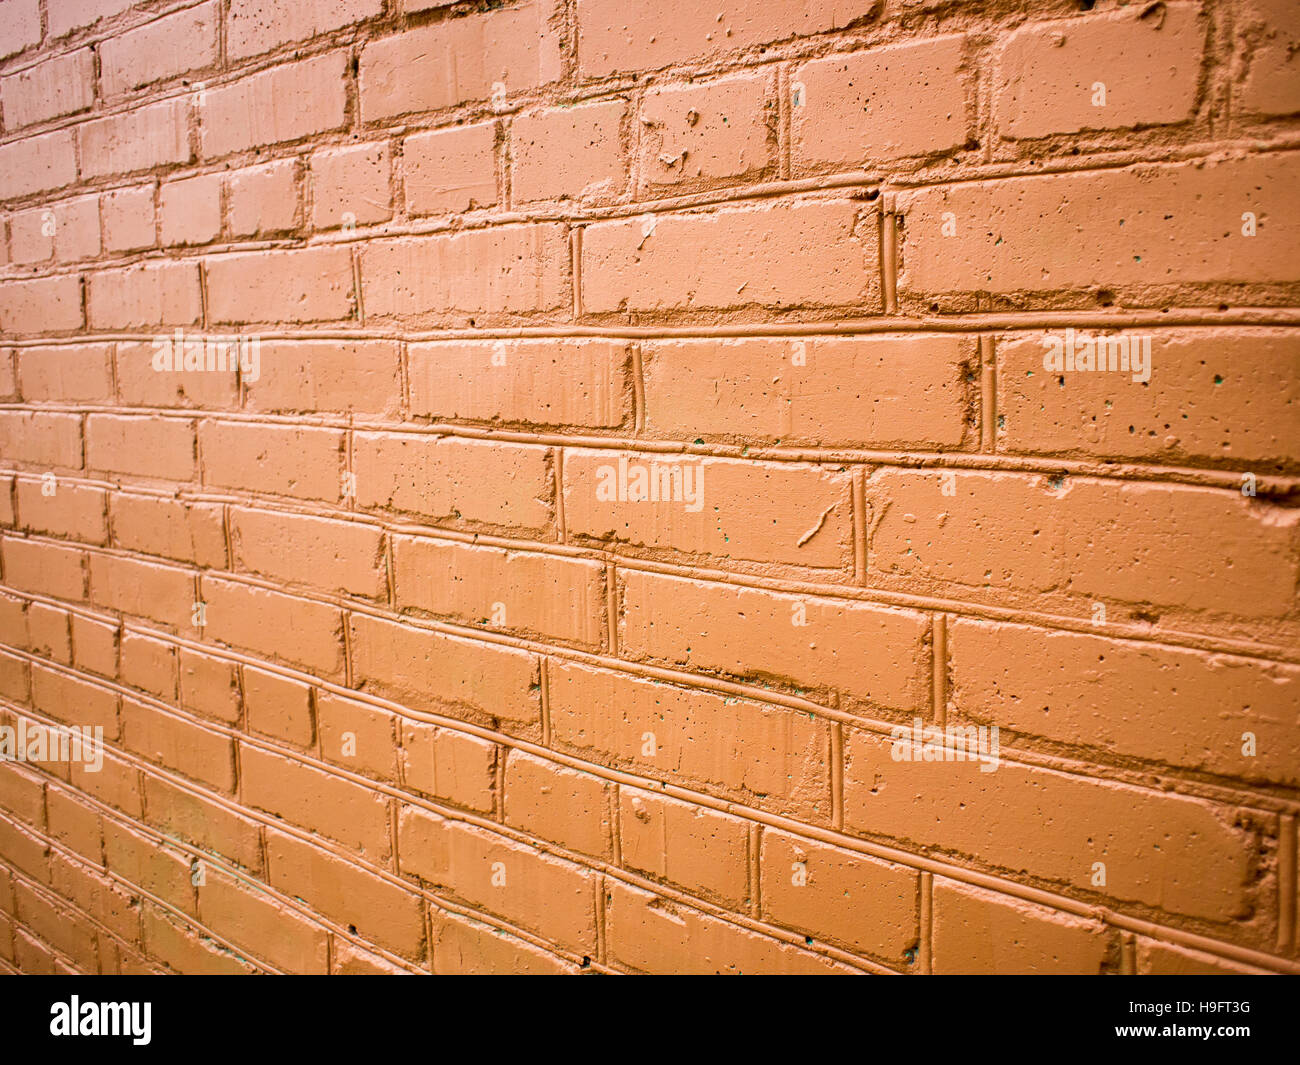 View angle on the brick wall, painted in red paint Stock Photo